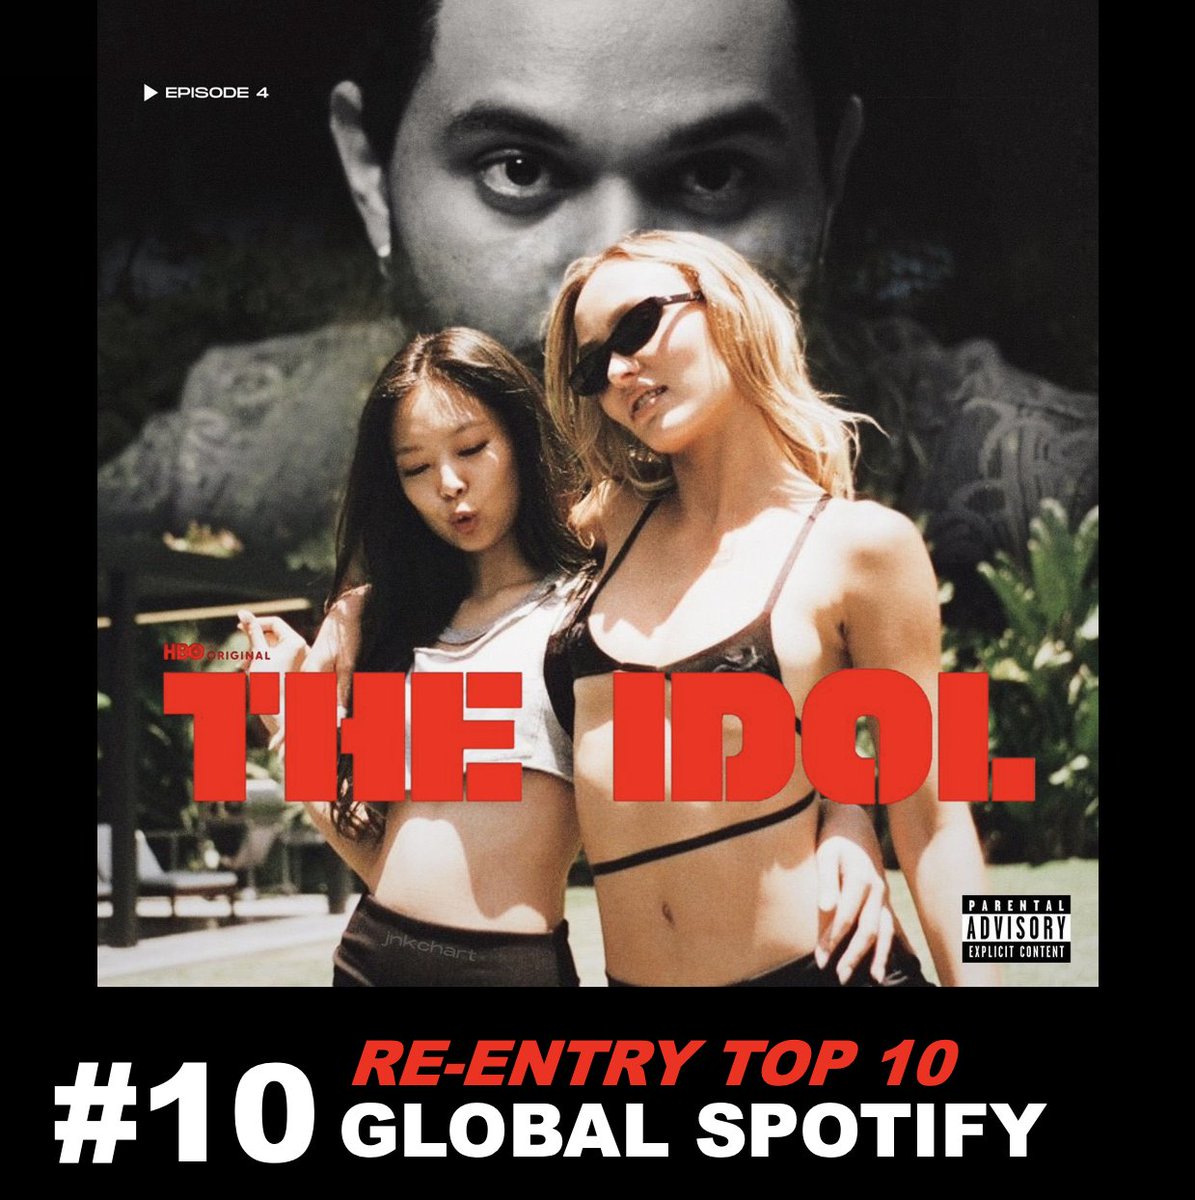 'One of The Girls' with #TheWeeknd, #JENNIE & #LilyRoseDepp re-enters the Top 10 on Global Spotify at #10 (+5) with 3,900,269 filtered streams!💪💥🔝🔟🔙 👑👑👑❤️‍🔥 @oddatelier #BLACKPINK @BLACKPINK